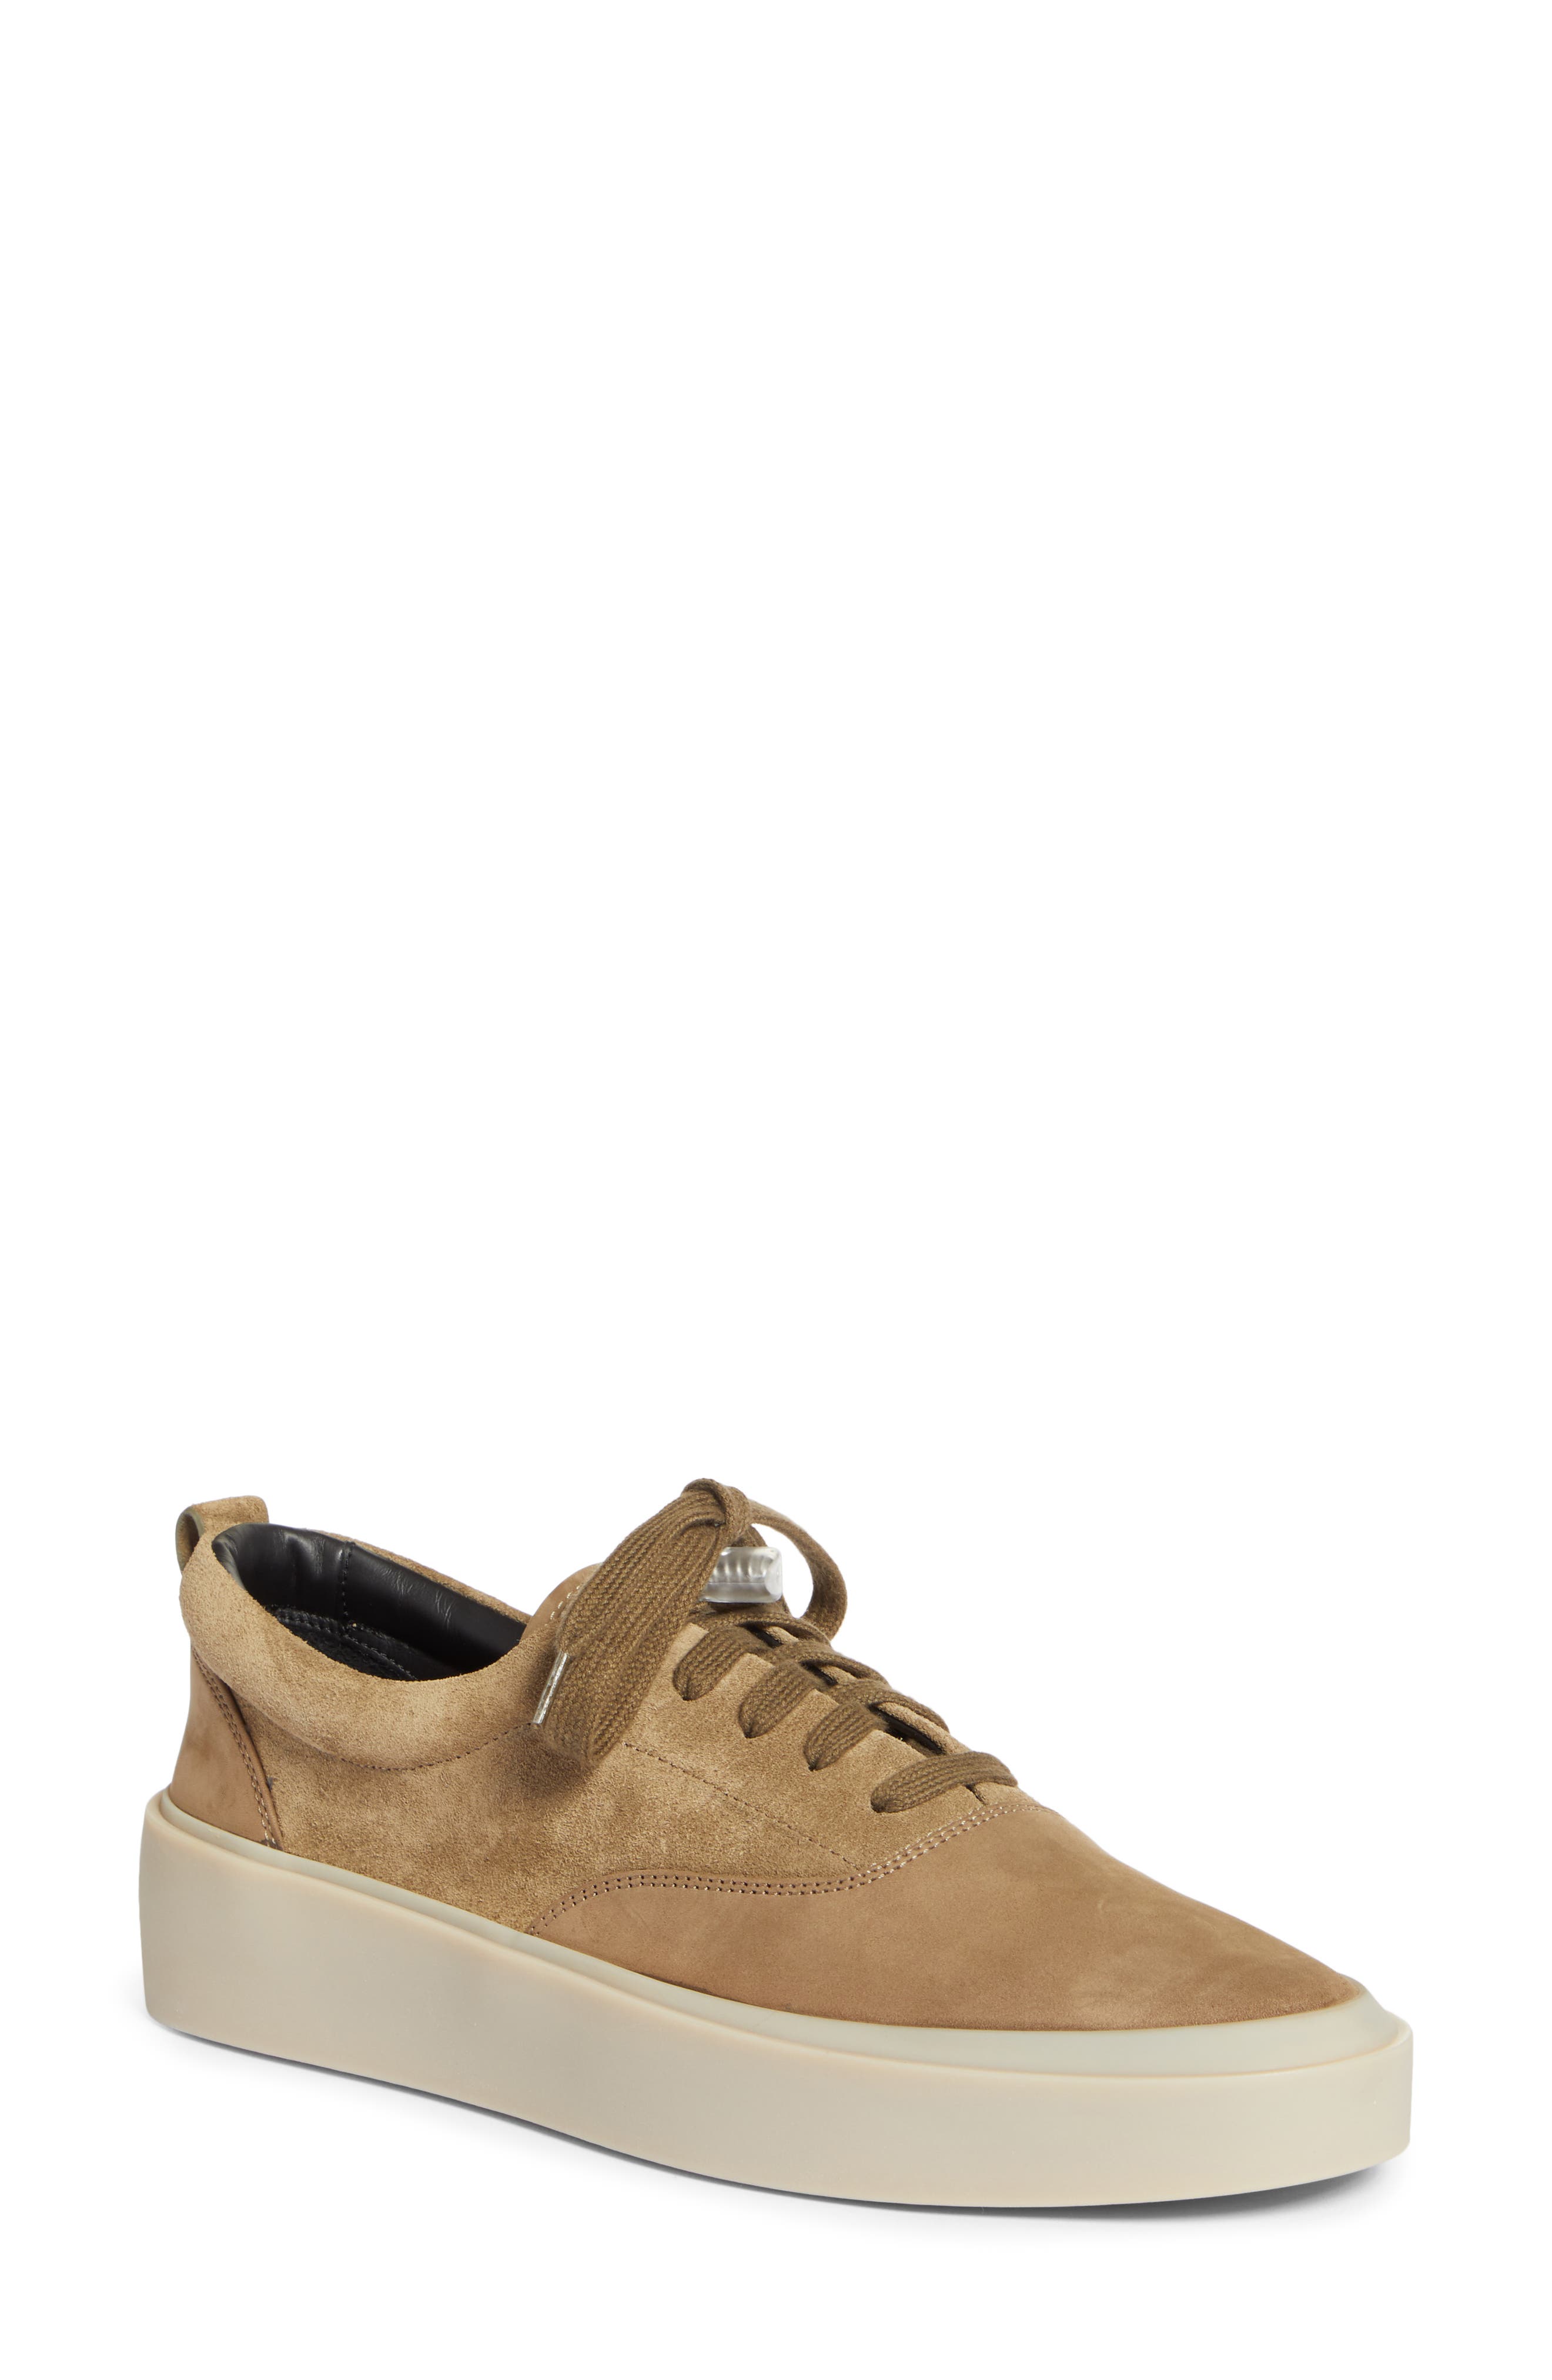 Fear of God 101 Low Top Sneaker in Taupe at Nordstrom, Size 11W-12Us